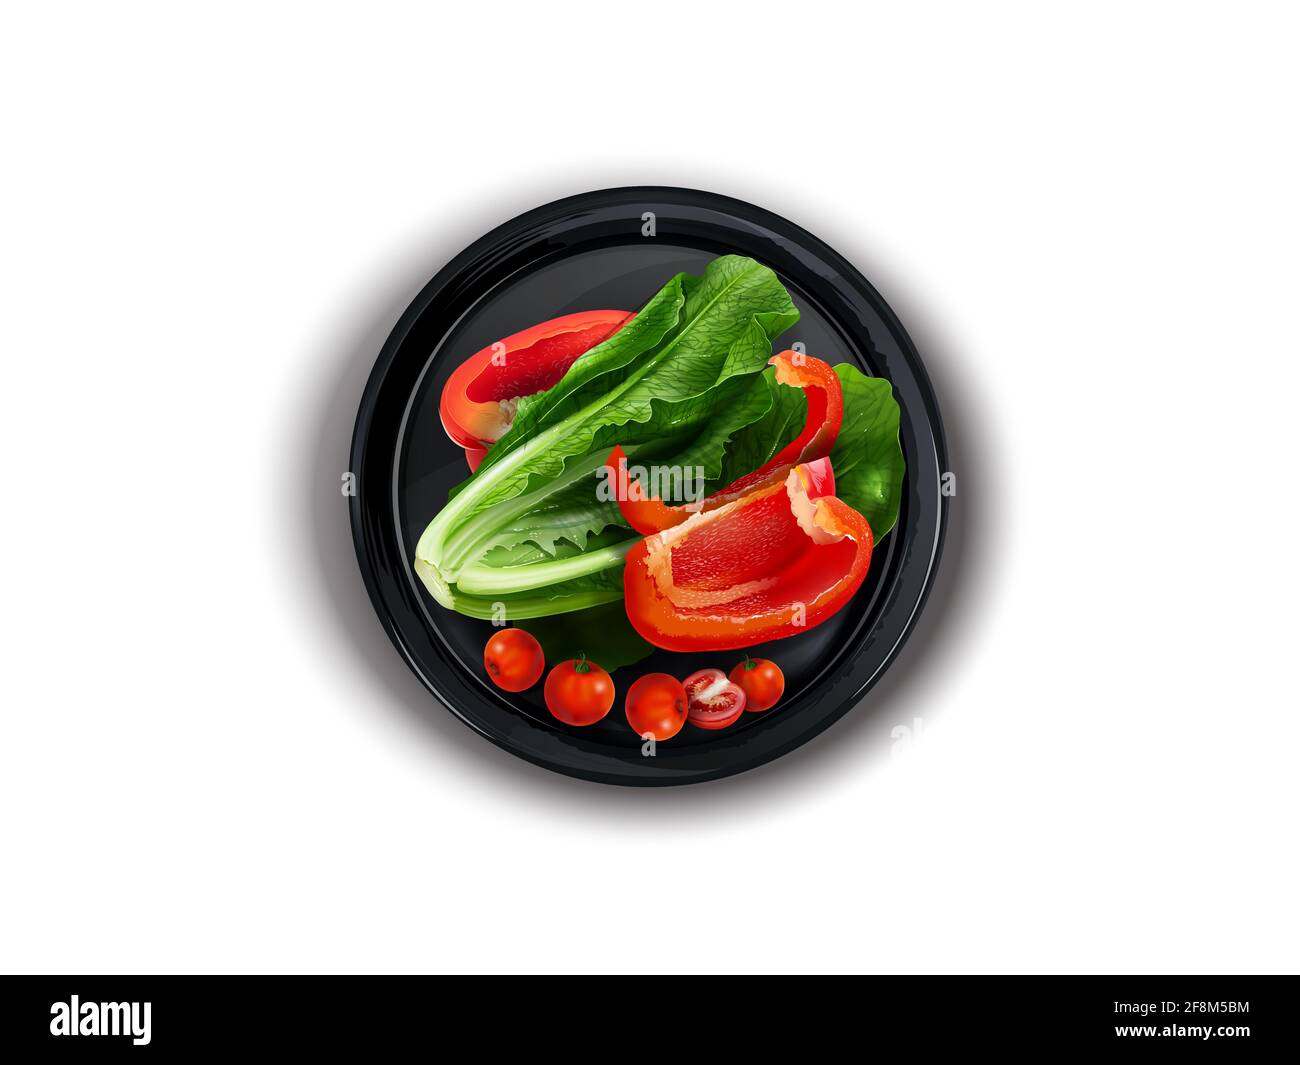 Bell pepper, lettuce and cherry tomatoes on a black plate. Stock Photo